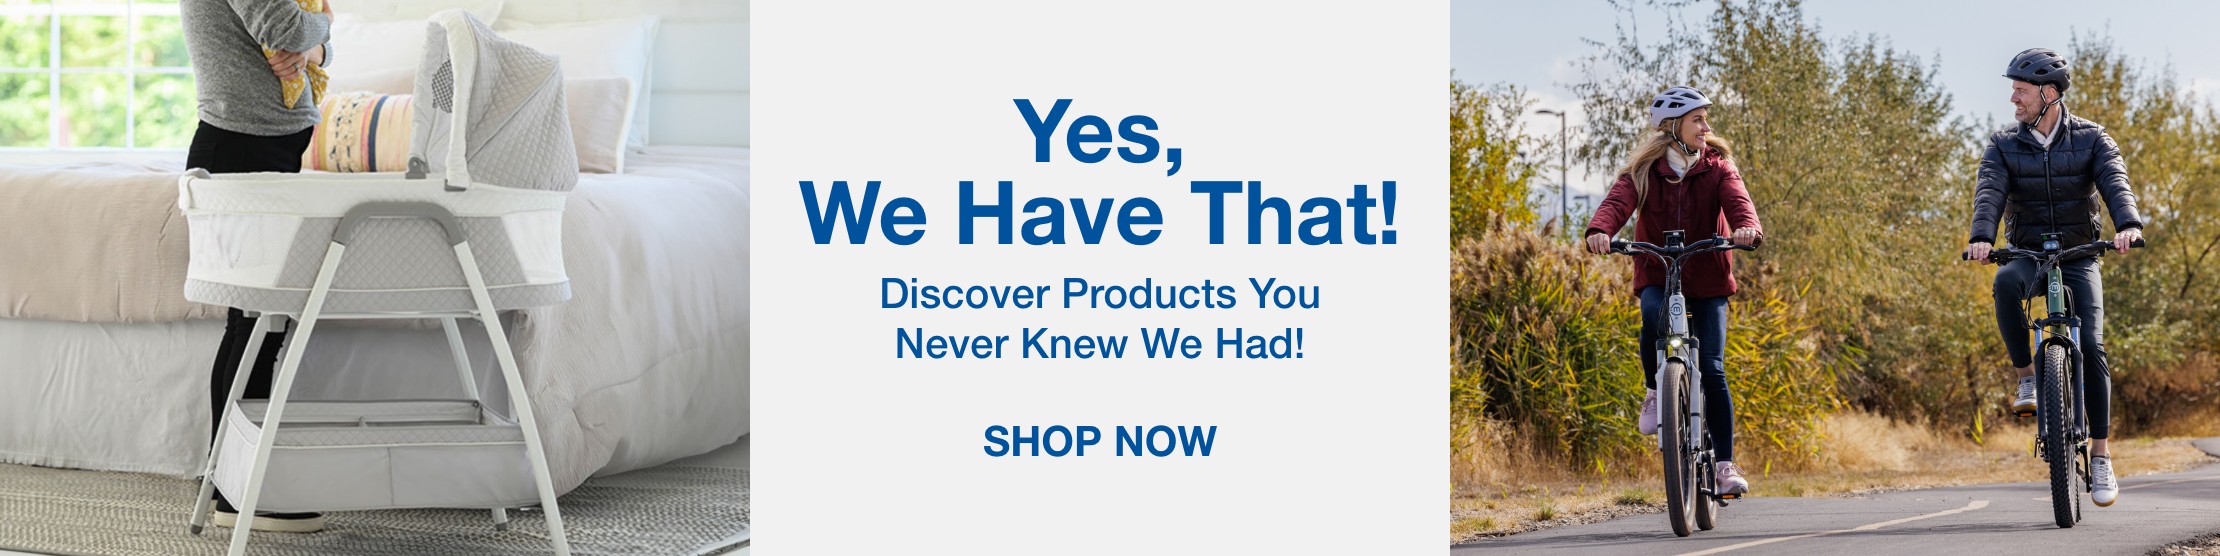 Yes we have that discover products you never knew we had! shop now